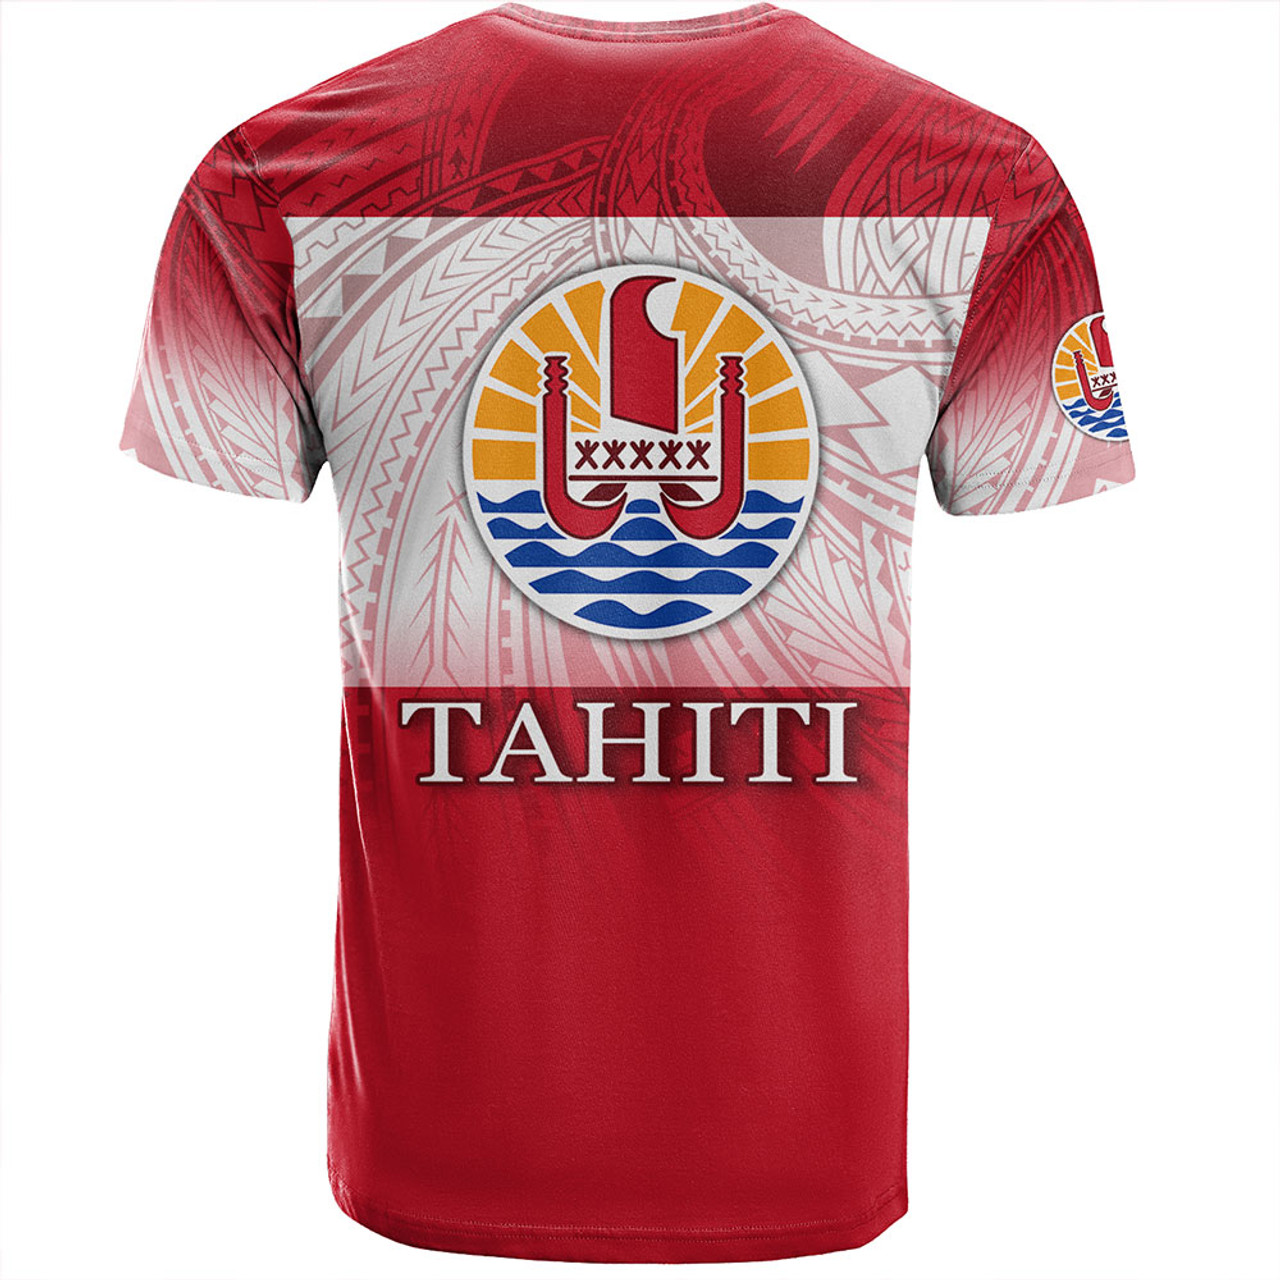 Tahiti T-Shirt - Flag Color With Traditional Patterns